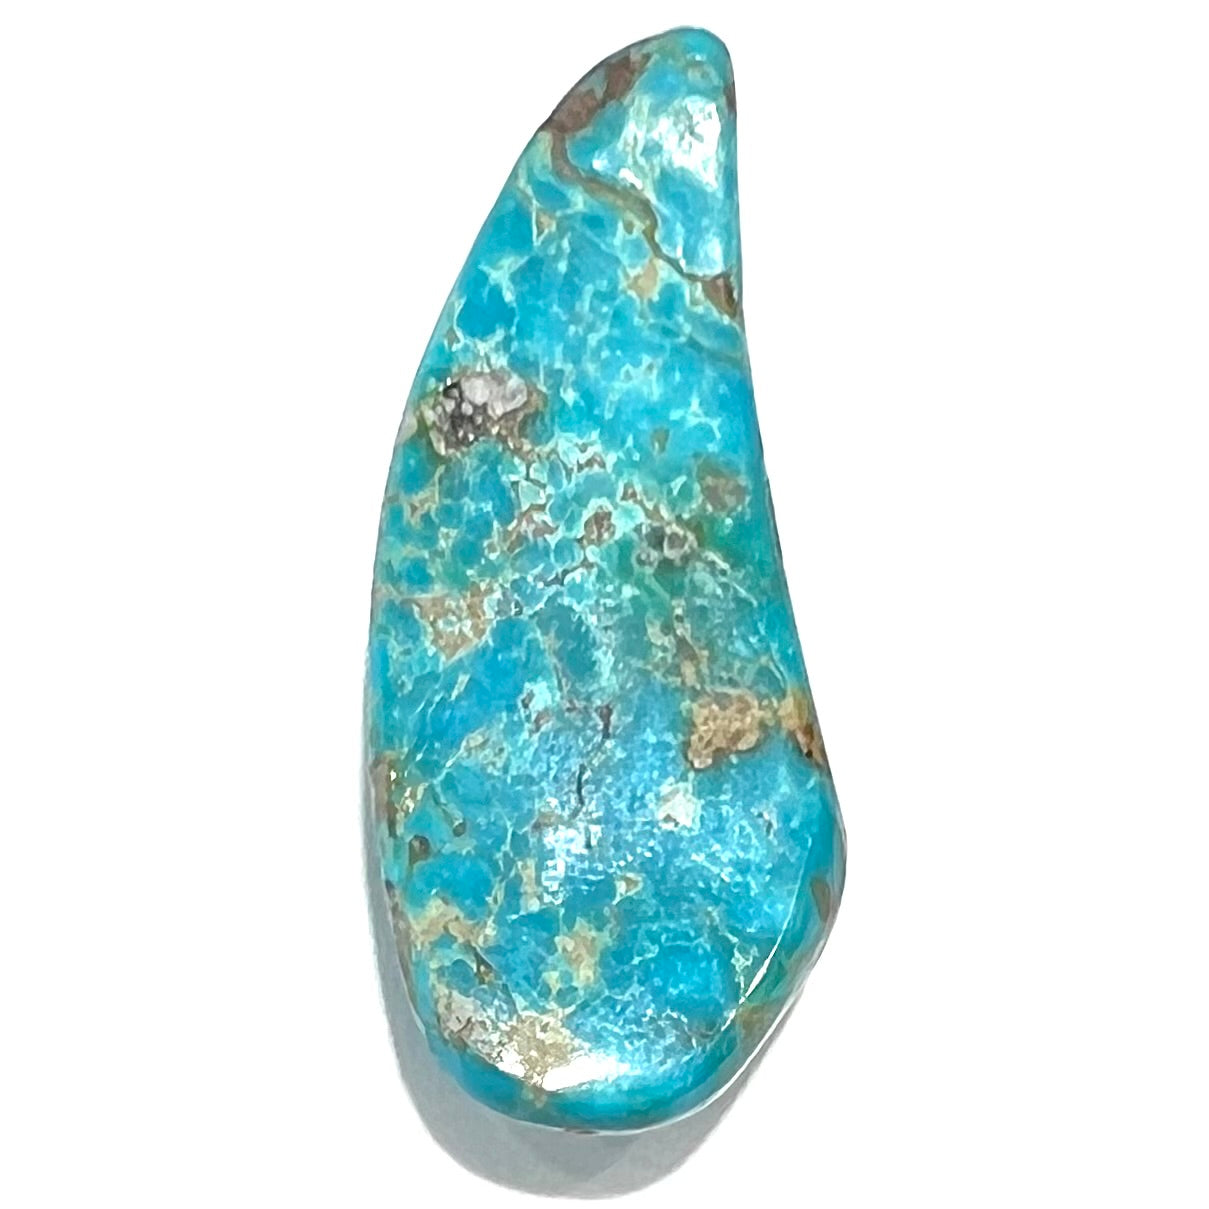 A loose, freeform cabochon cut Kingman turquoise stone from Arizona.  The stone is blue with gray and brown matrix.